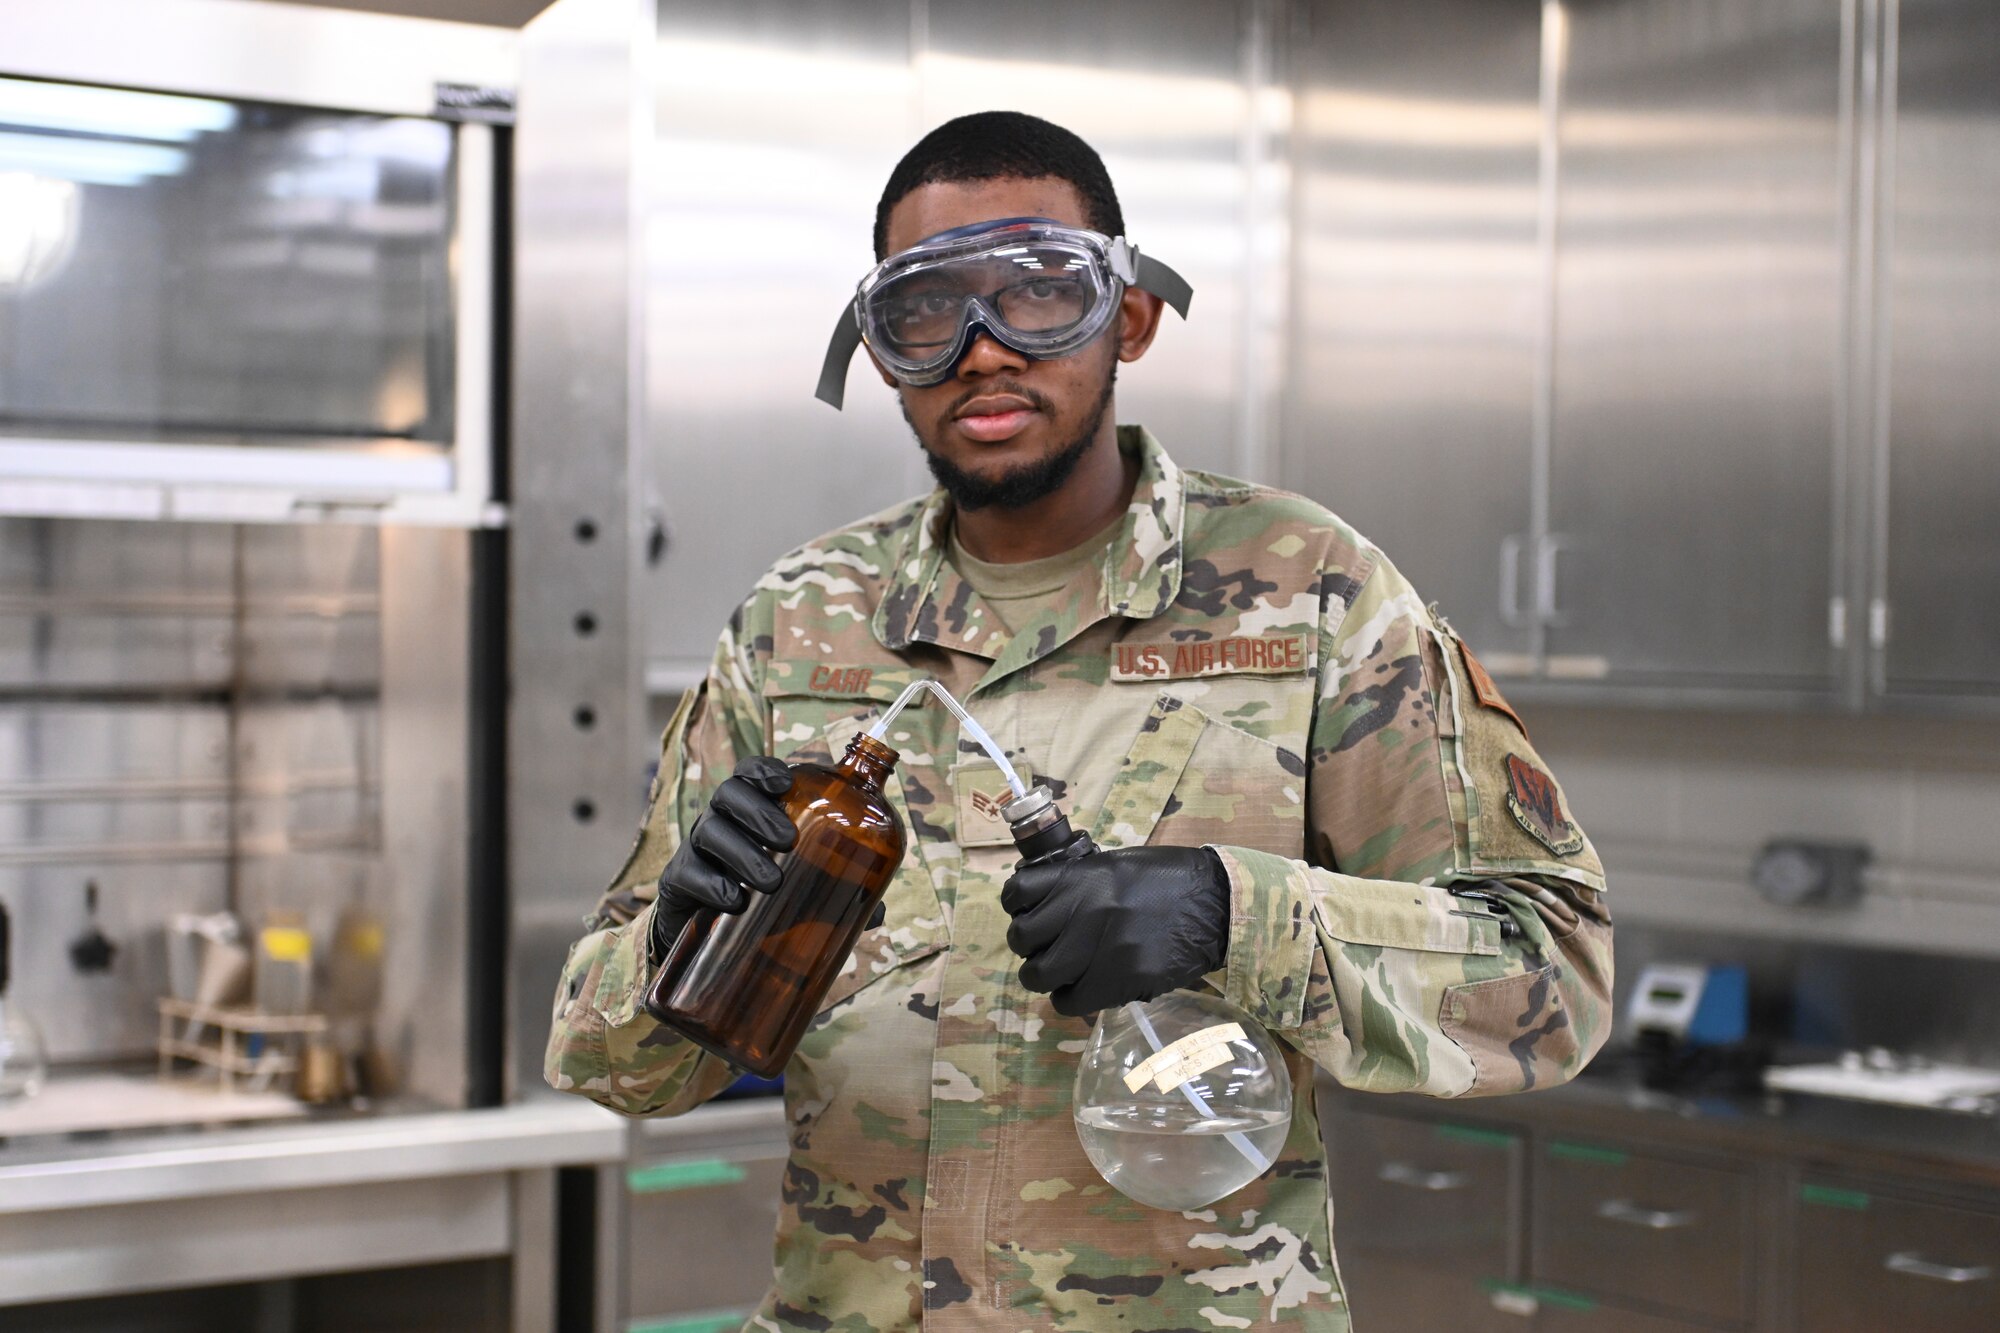 A photo of an Airman holding two instruments used in a fuel lap, wearing goggles.